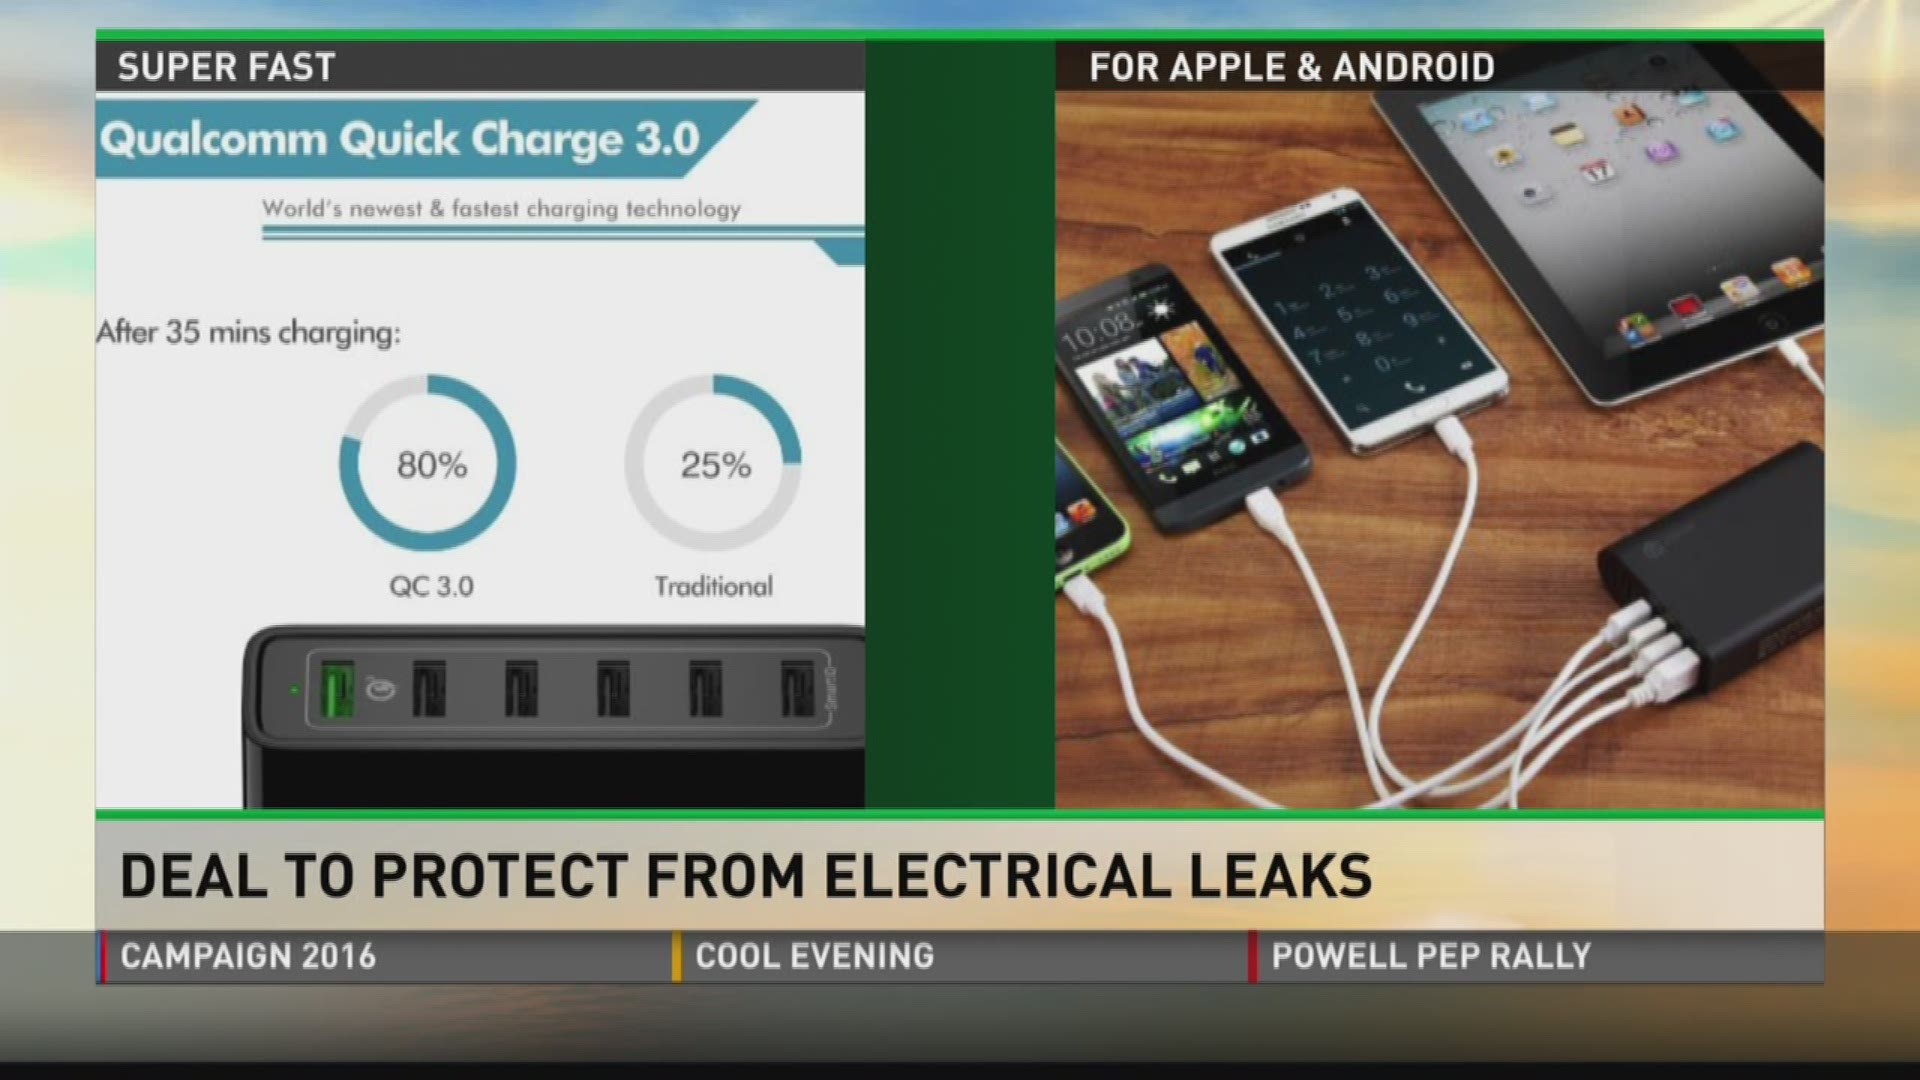 Money man Matt Granite shows how to save on a deal that protects from electrical leaks.